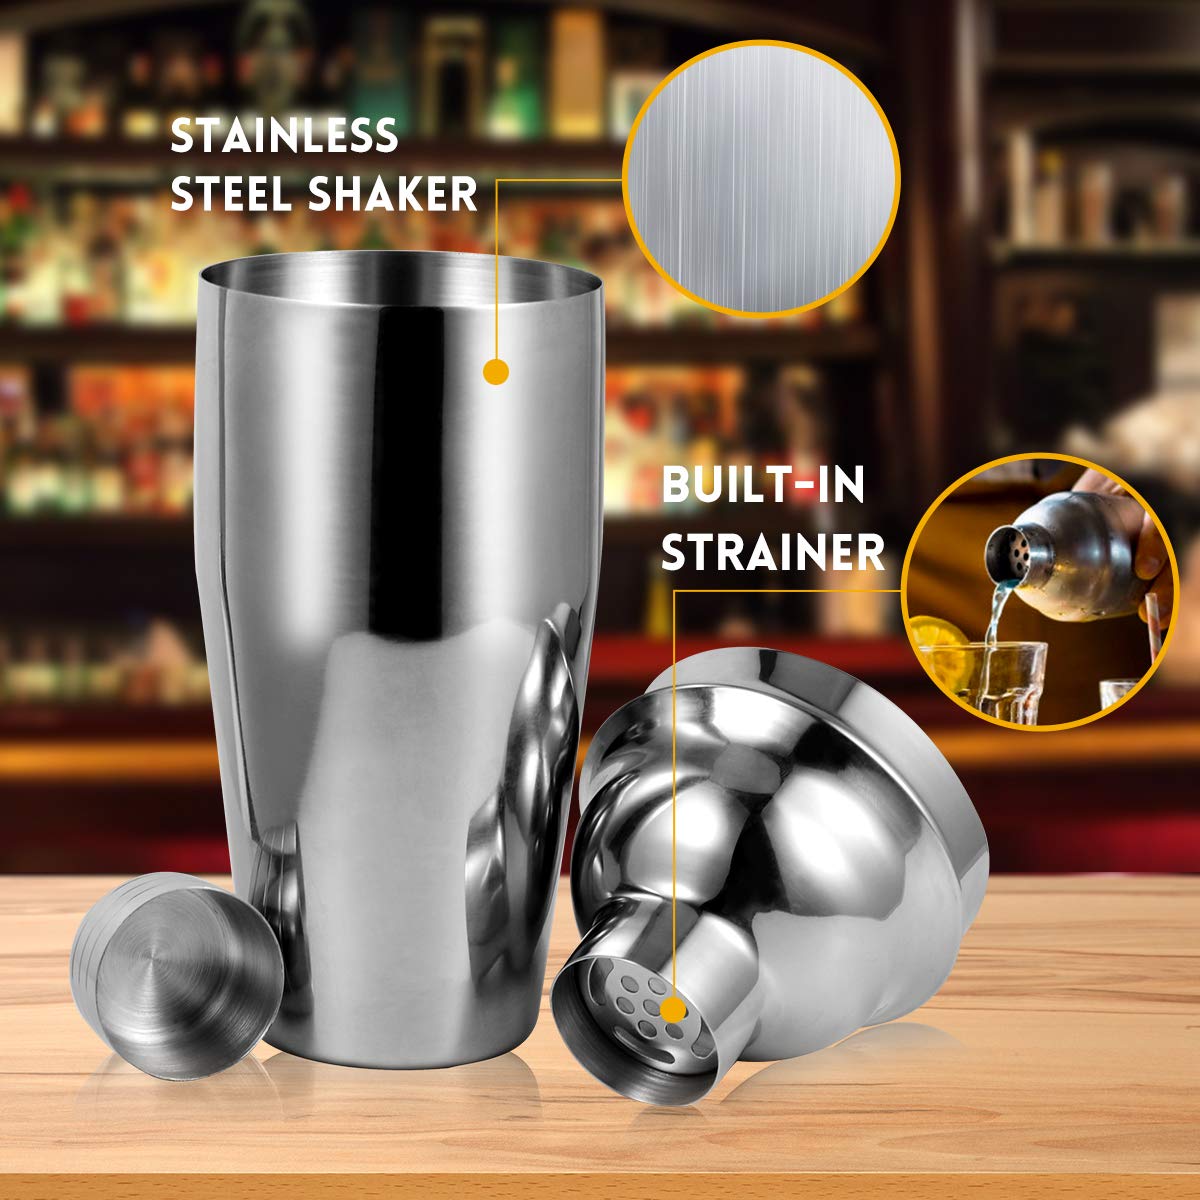 Cocktail Shaker Bar Mixer Set-Professional Bartender Premium Stainless Steel 25oz. Perfect For Homemade Party Drinks with Your Favourite Liquor Mixes. This 12 Piece Kit Has All The Essentials You Need